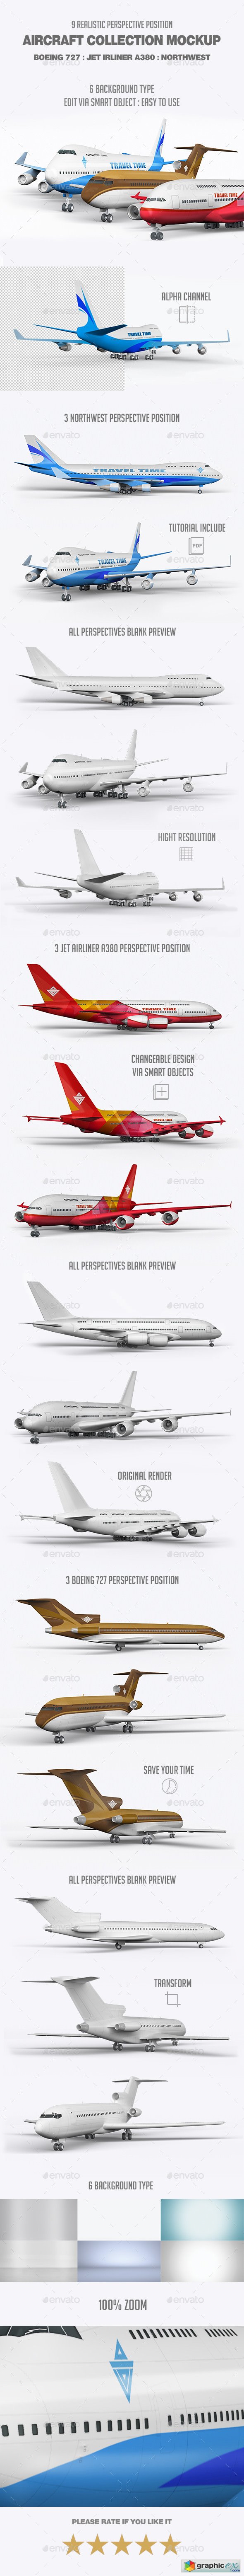 Aircraft Collection Mock-Up